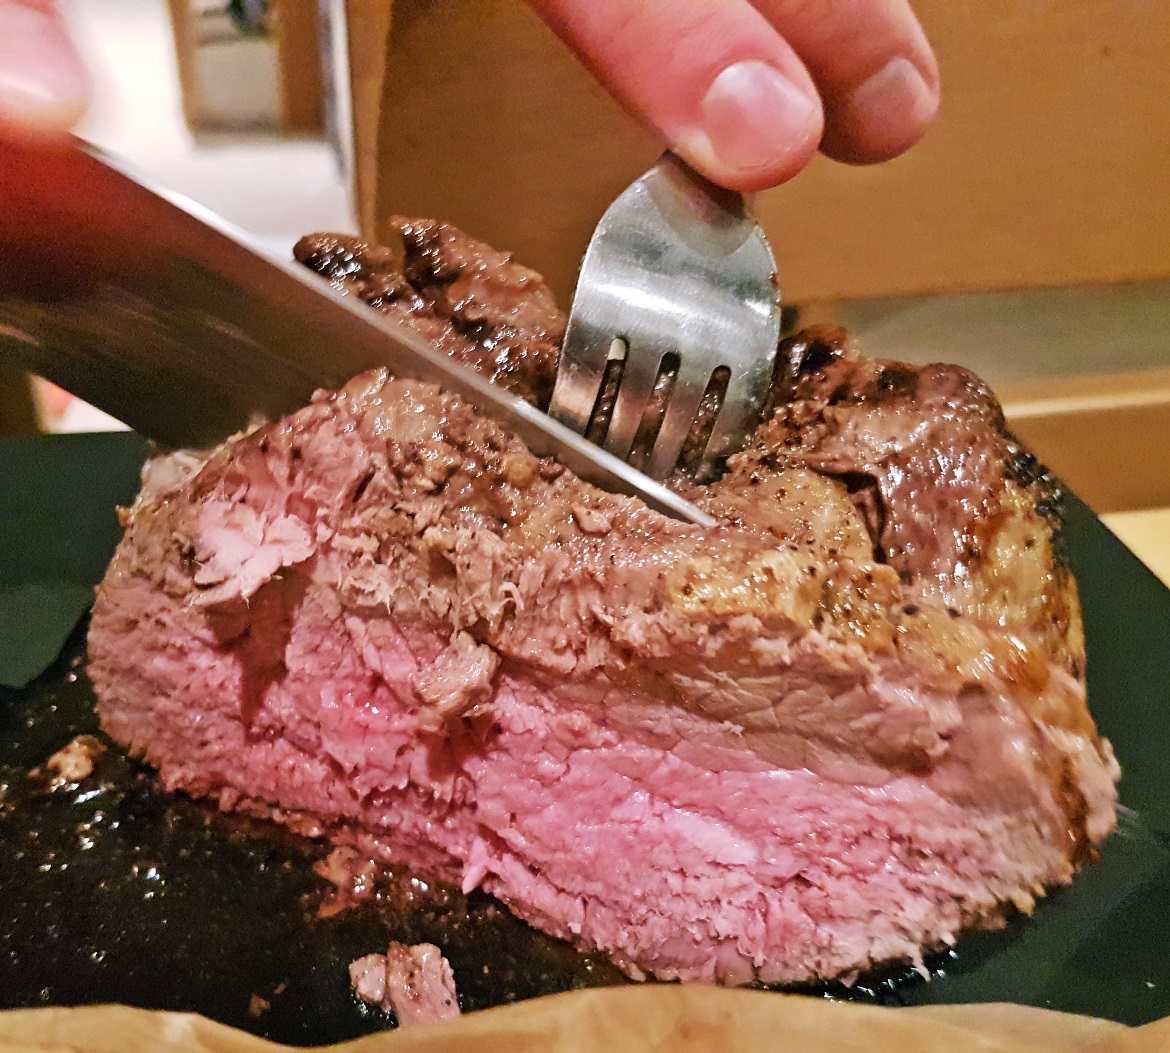 Carving the chateaubriand - Conqueror's Chateaubriand and Ye Olde Parchment Potatoes - Cooking Games Recipe by BeckyBecky Blogs